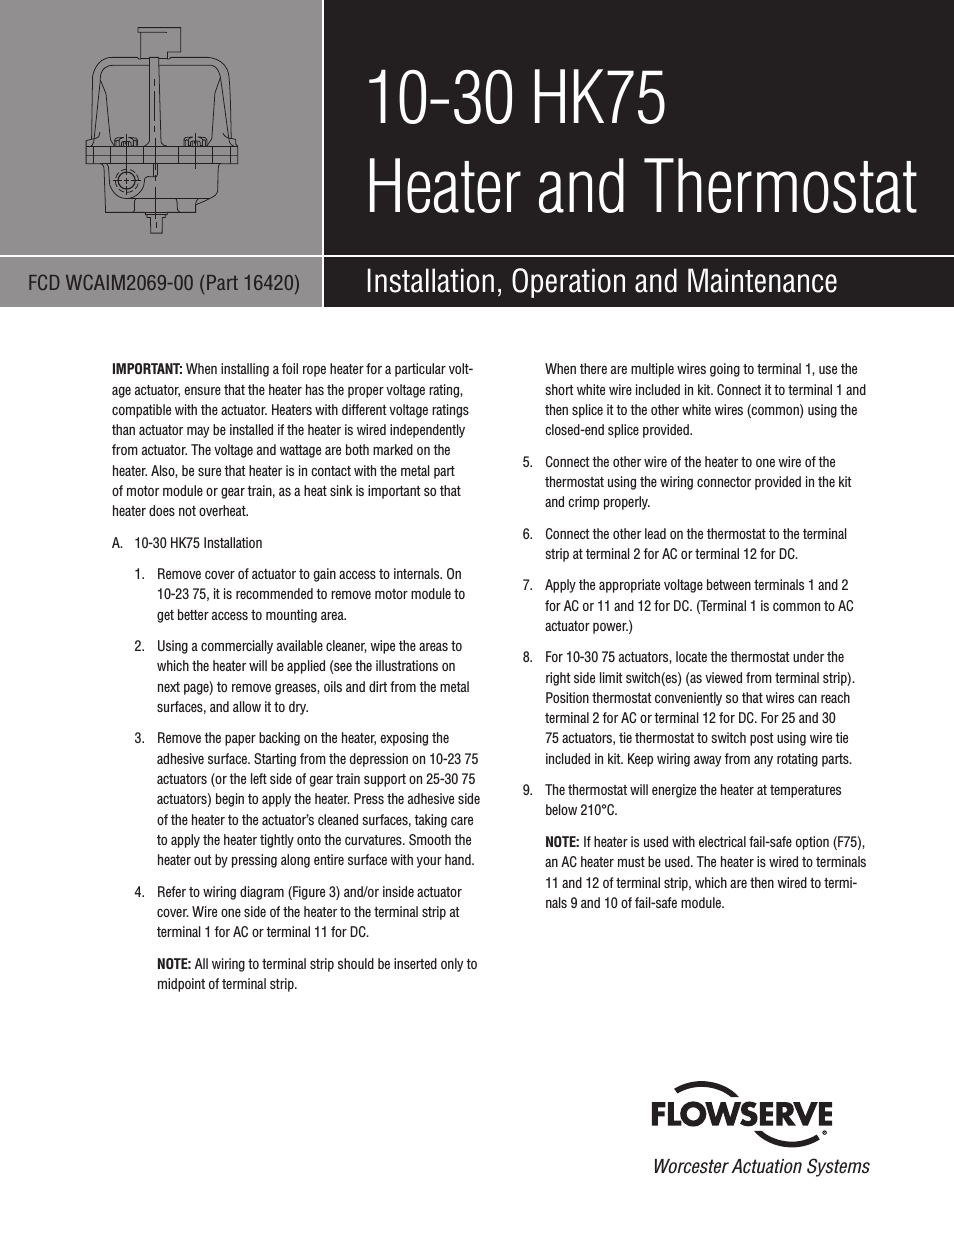 10-30 HK75 Heater and Thermostat